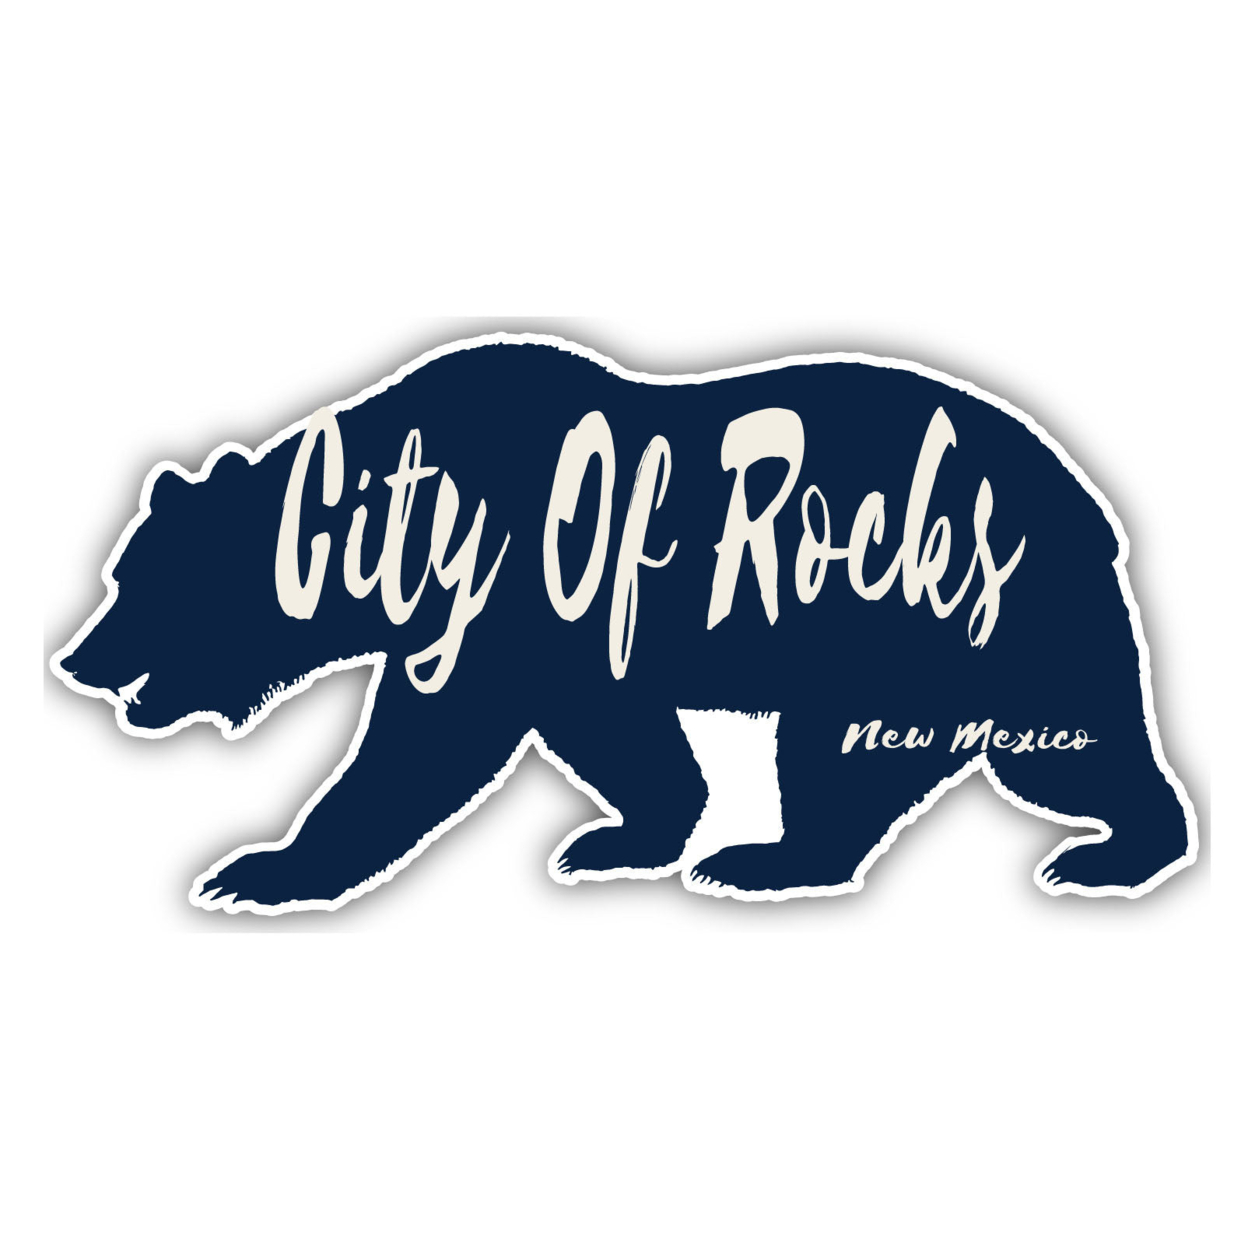 City Of Rocks New Mexico Souvenir Decorative Stickers (Choose Theme And Size) - 4-Pack, 8-Inch, Bear